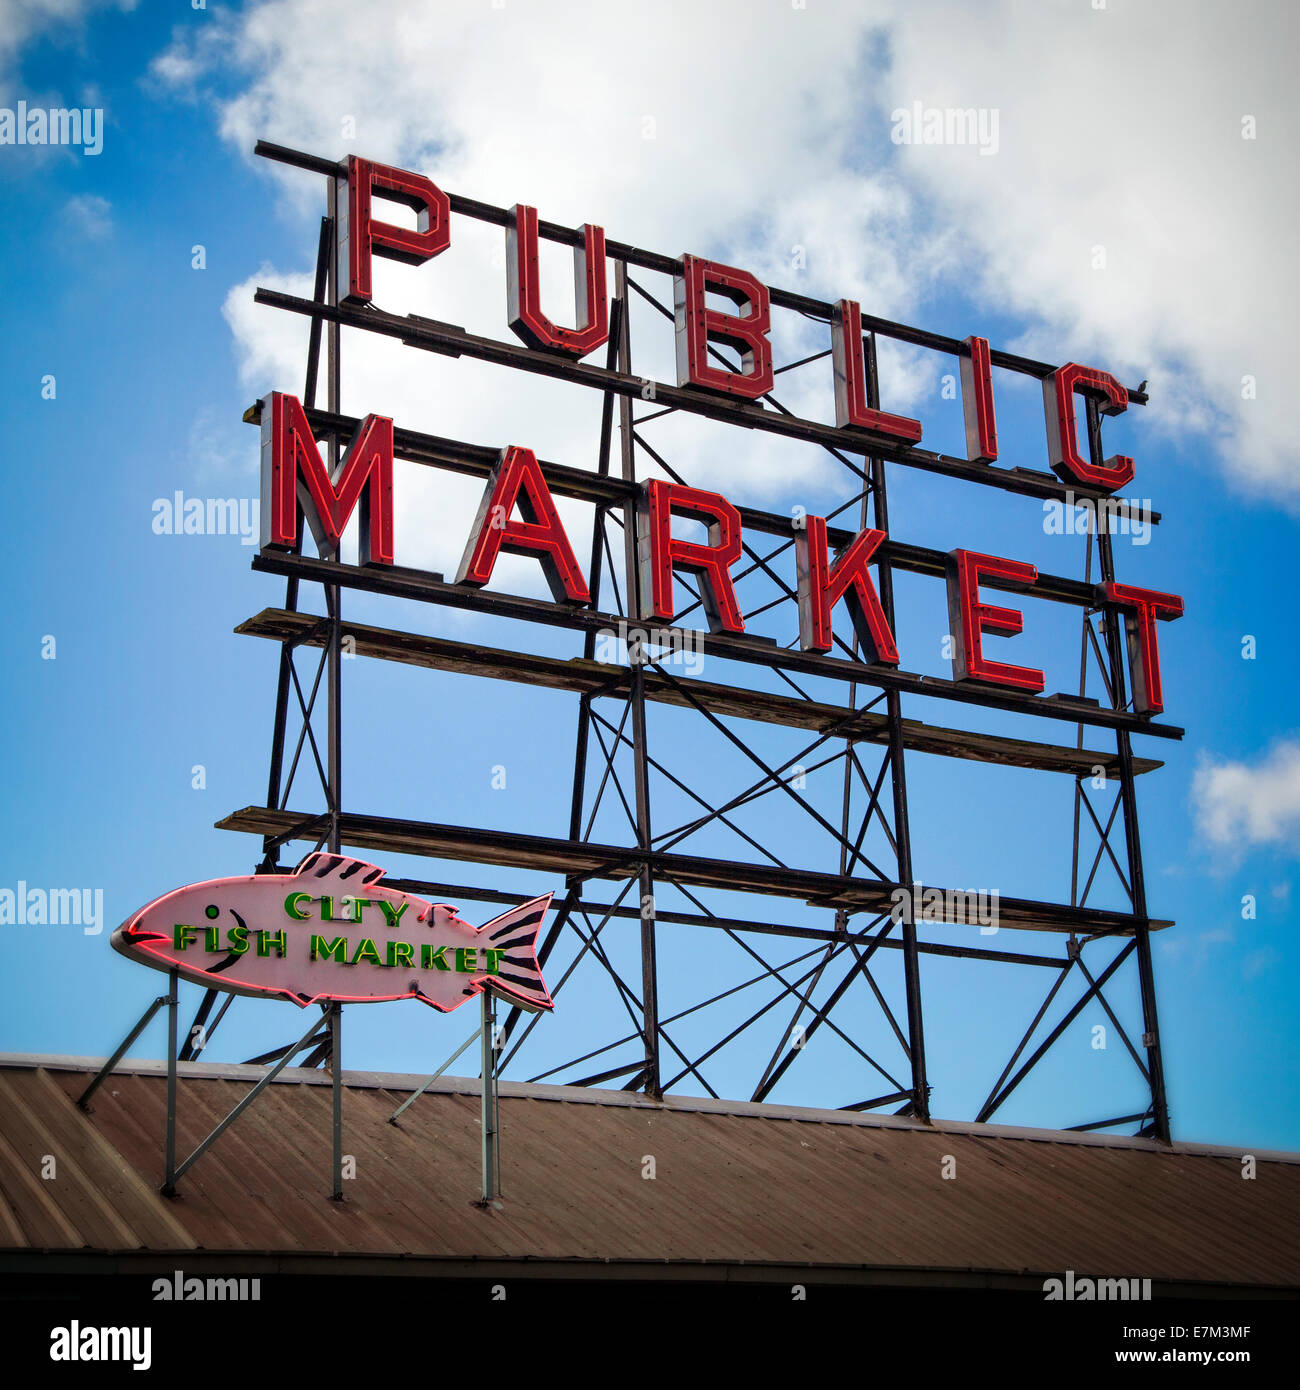 The Pikes Market Place sign from below with blue sky and billowy clouds Stock Photo